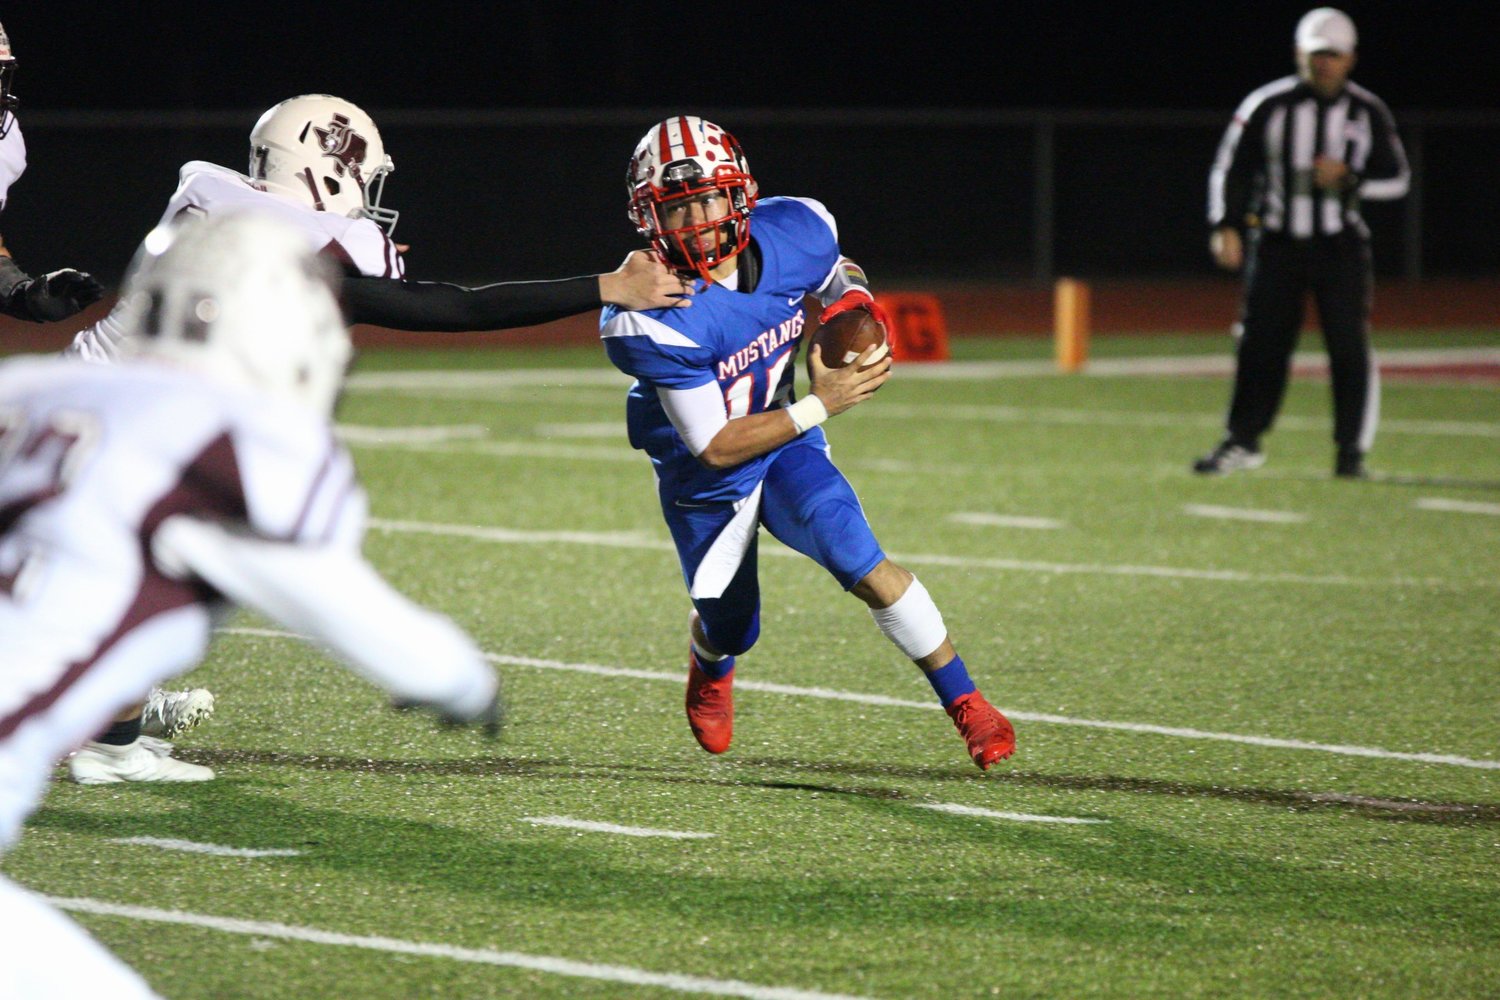 Mario Ponce (15) breaks away for a rush in Nixon-Smiley's 42-14 defeat on Thursday.